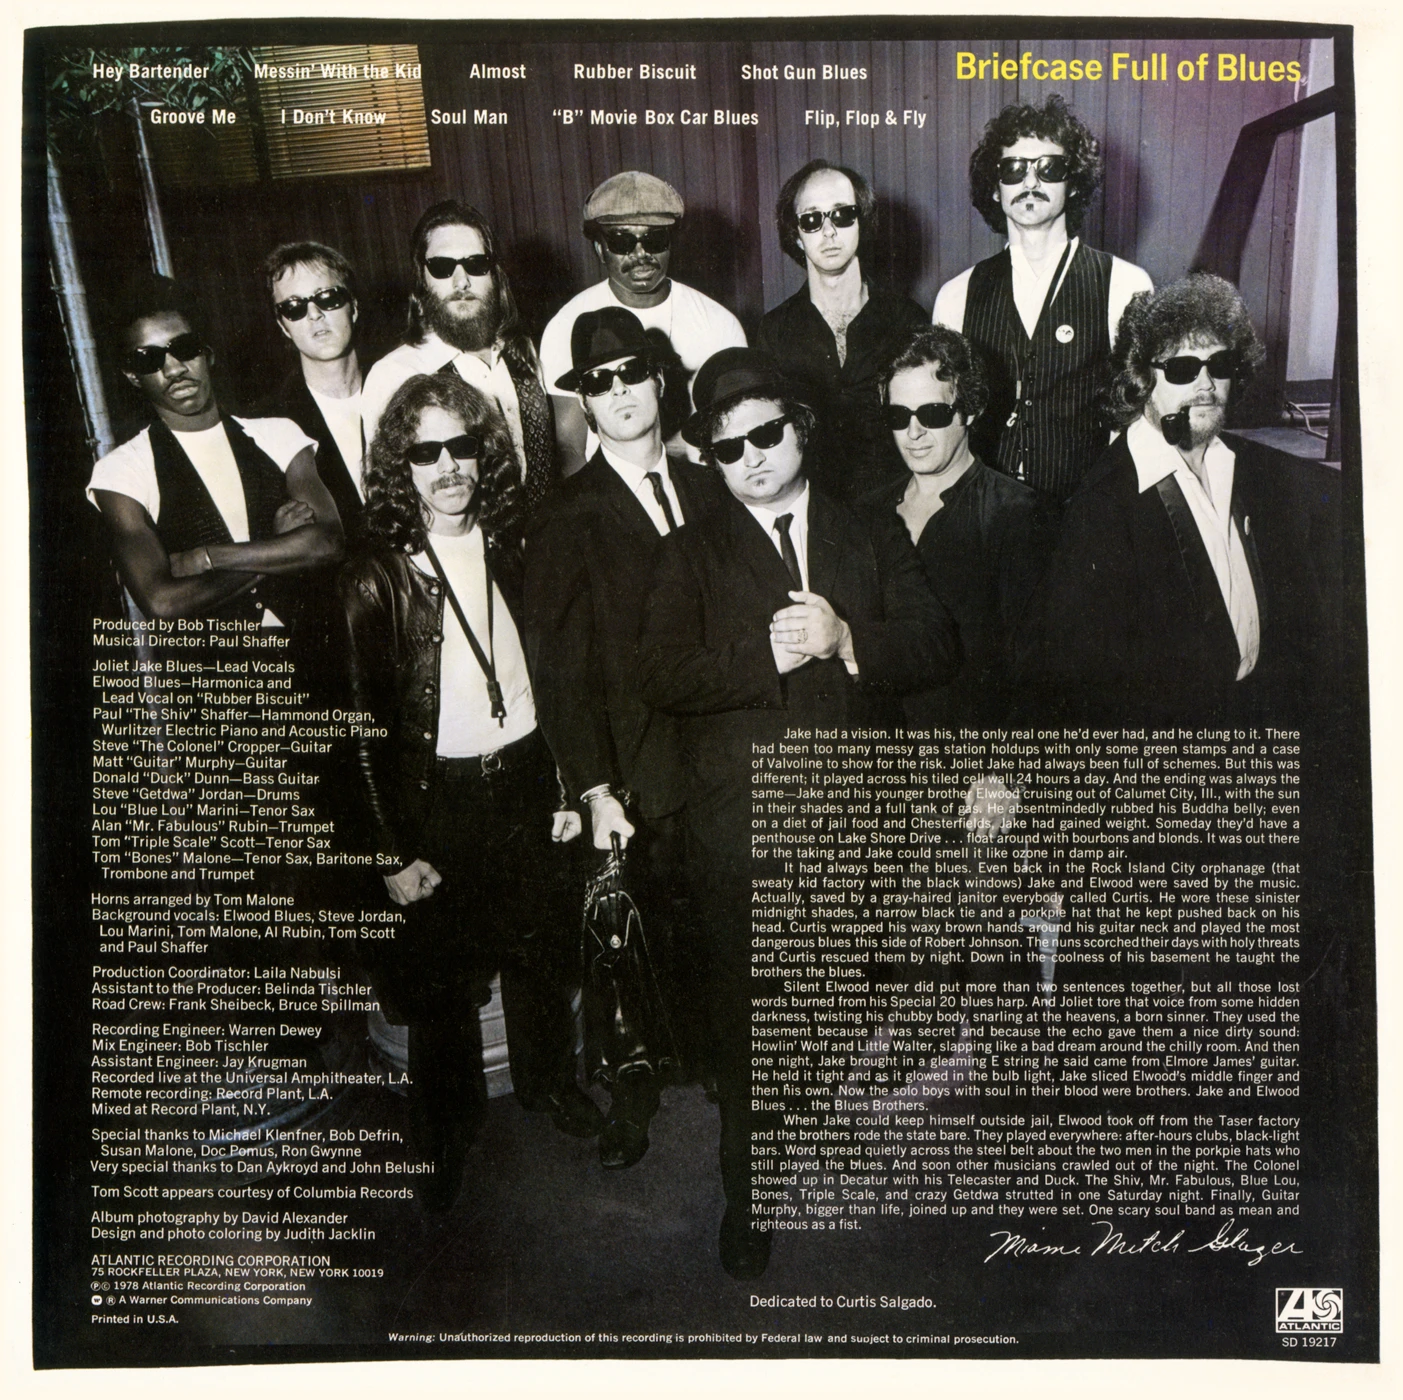 Briefcase Full Of Blues back cover